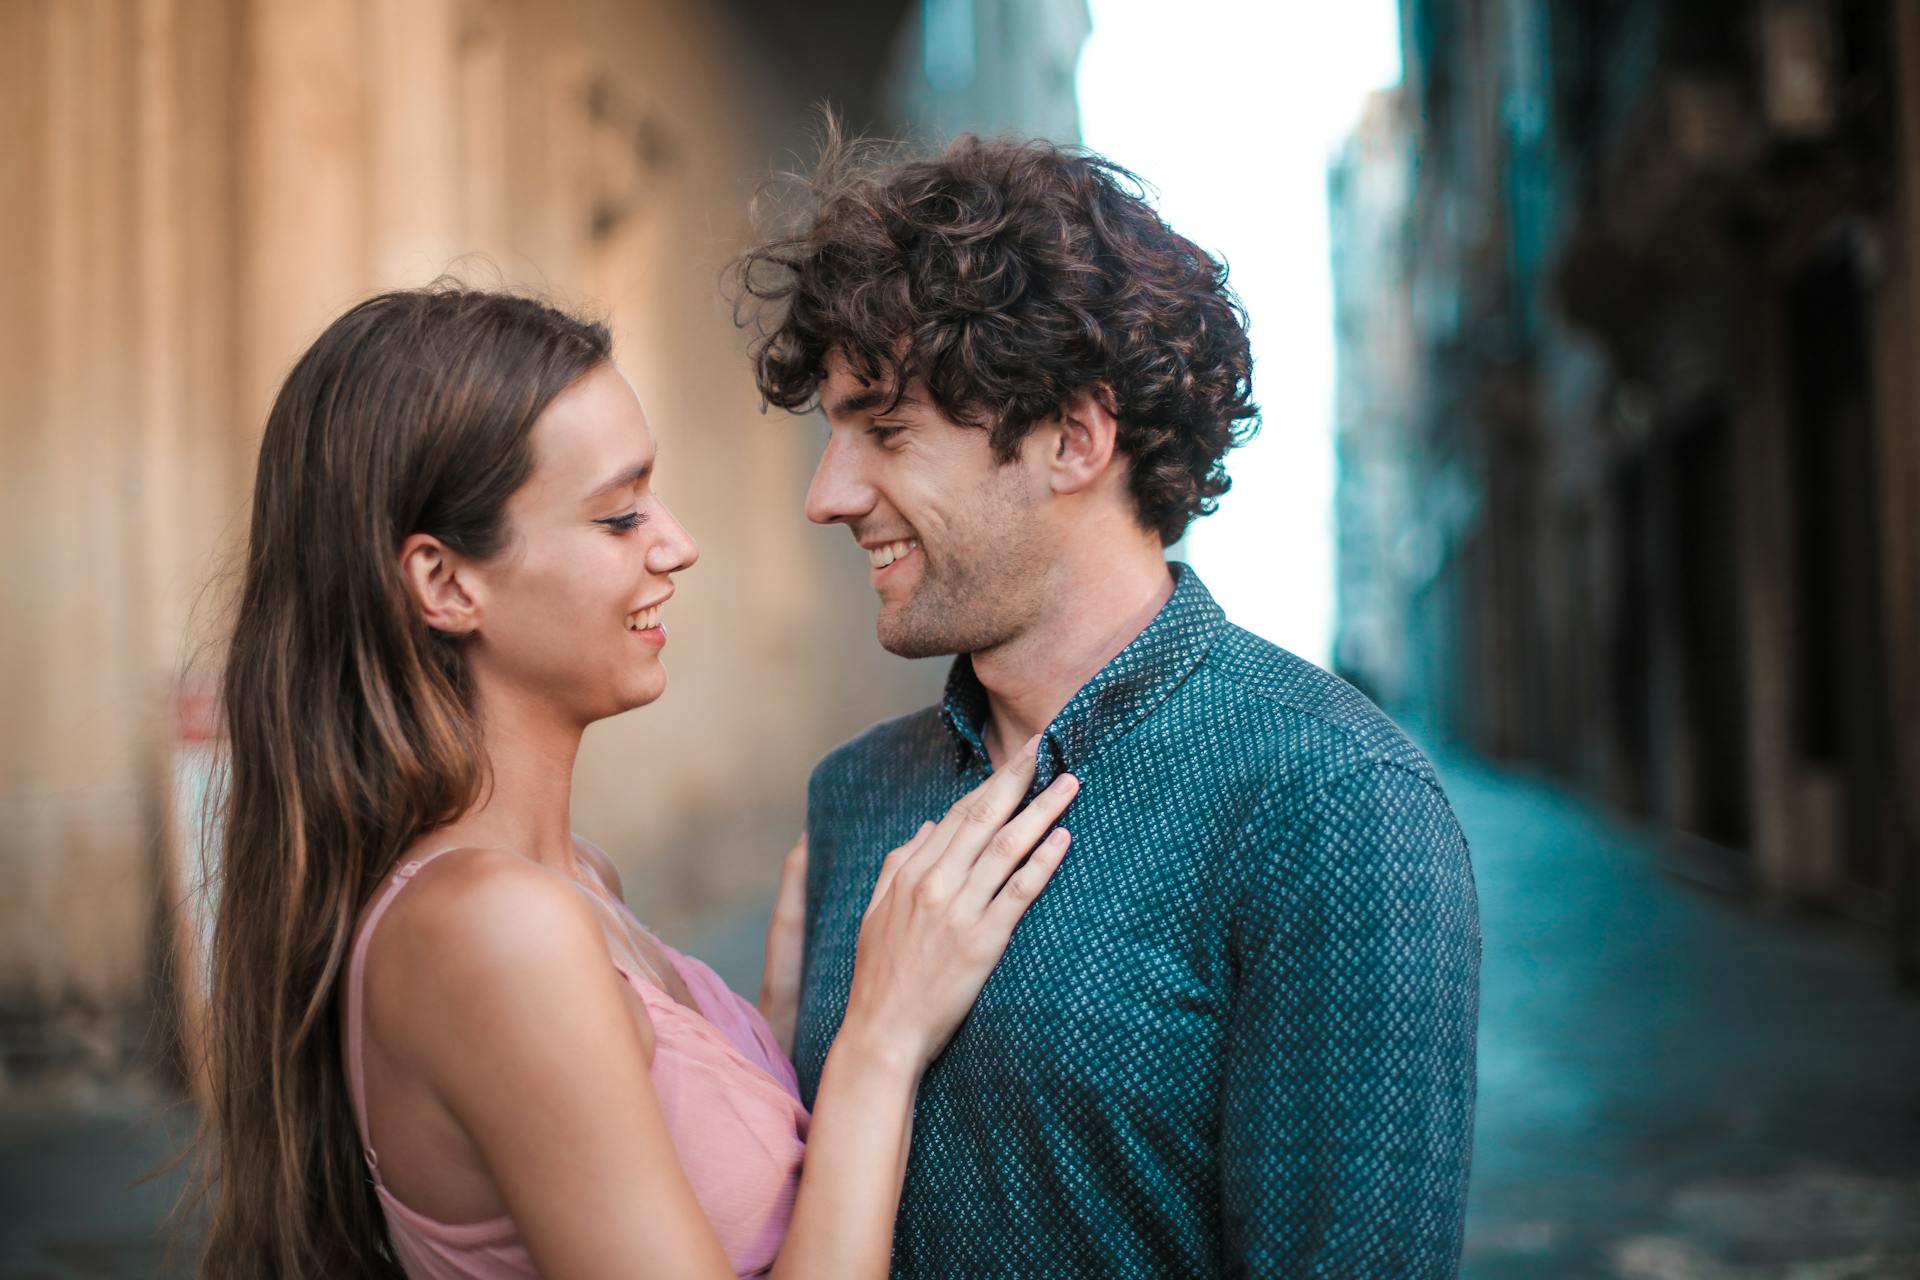 A happy young couple | Source: Pexels